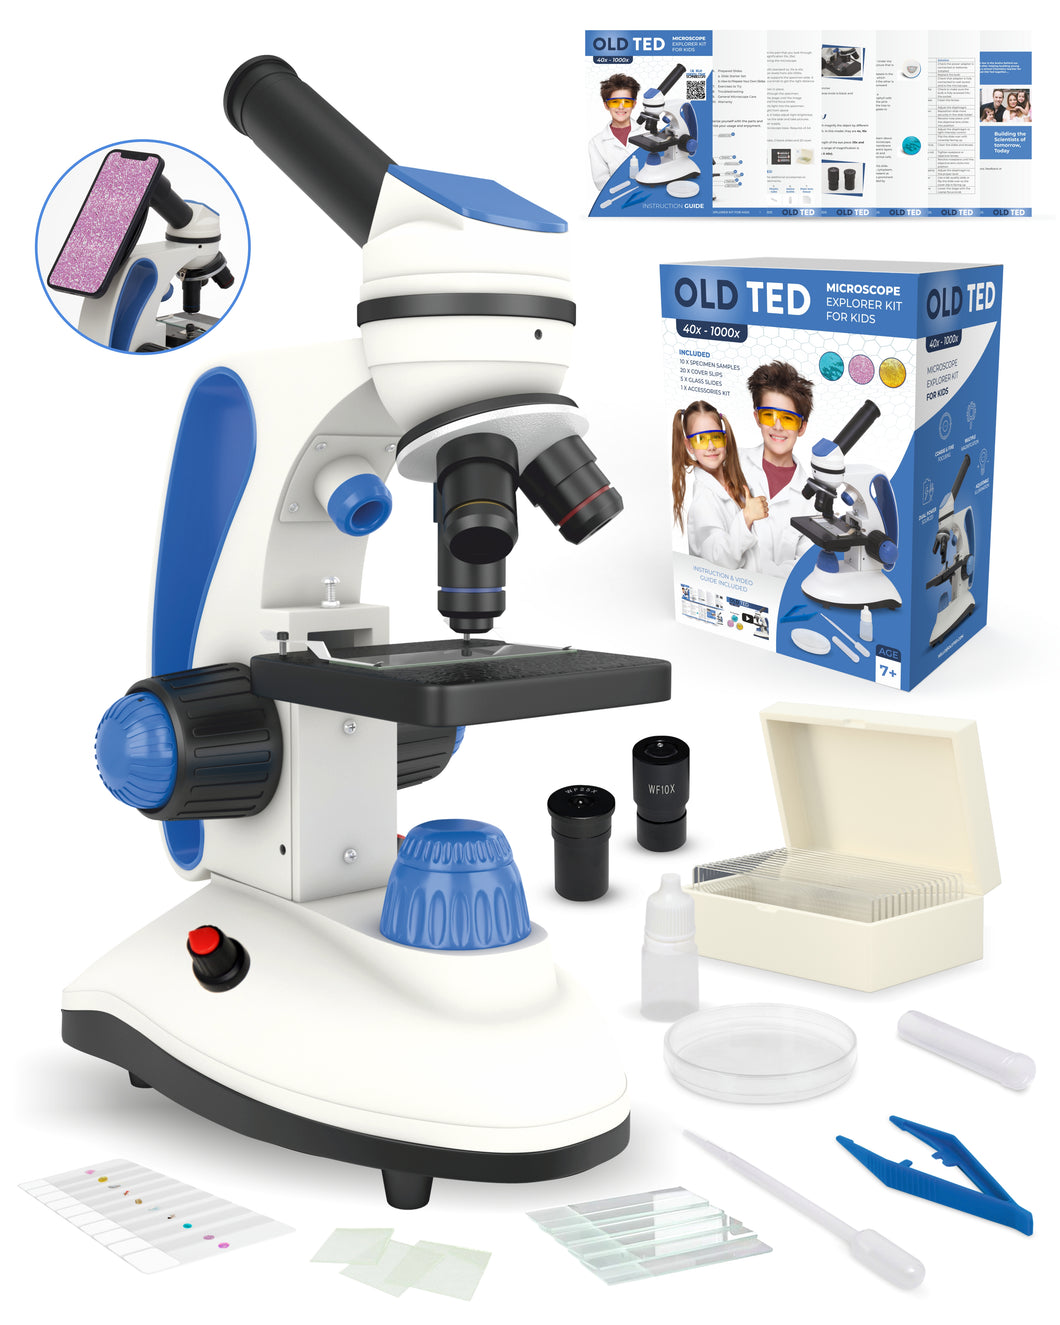 Old Ted 40x - 1000x Kids Microscope. Complete Microscope Kit with pre-Made Slides, Instruction Guide, Phone Adaptor & Microscope Accessories